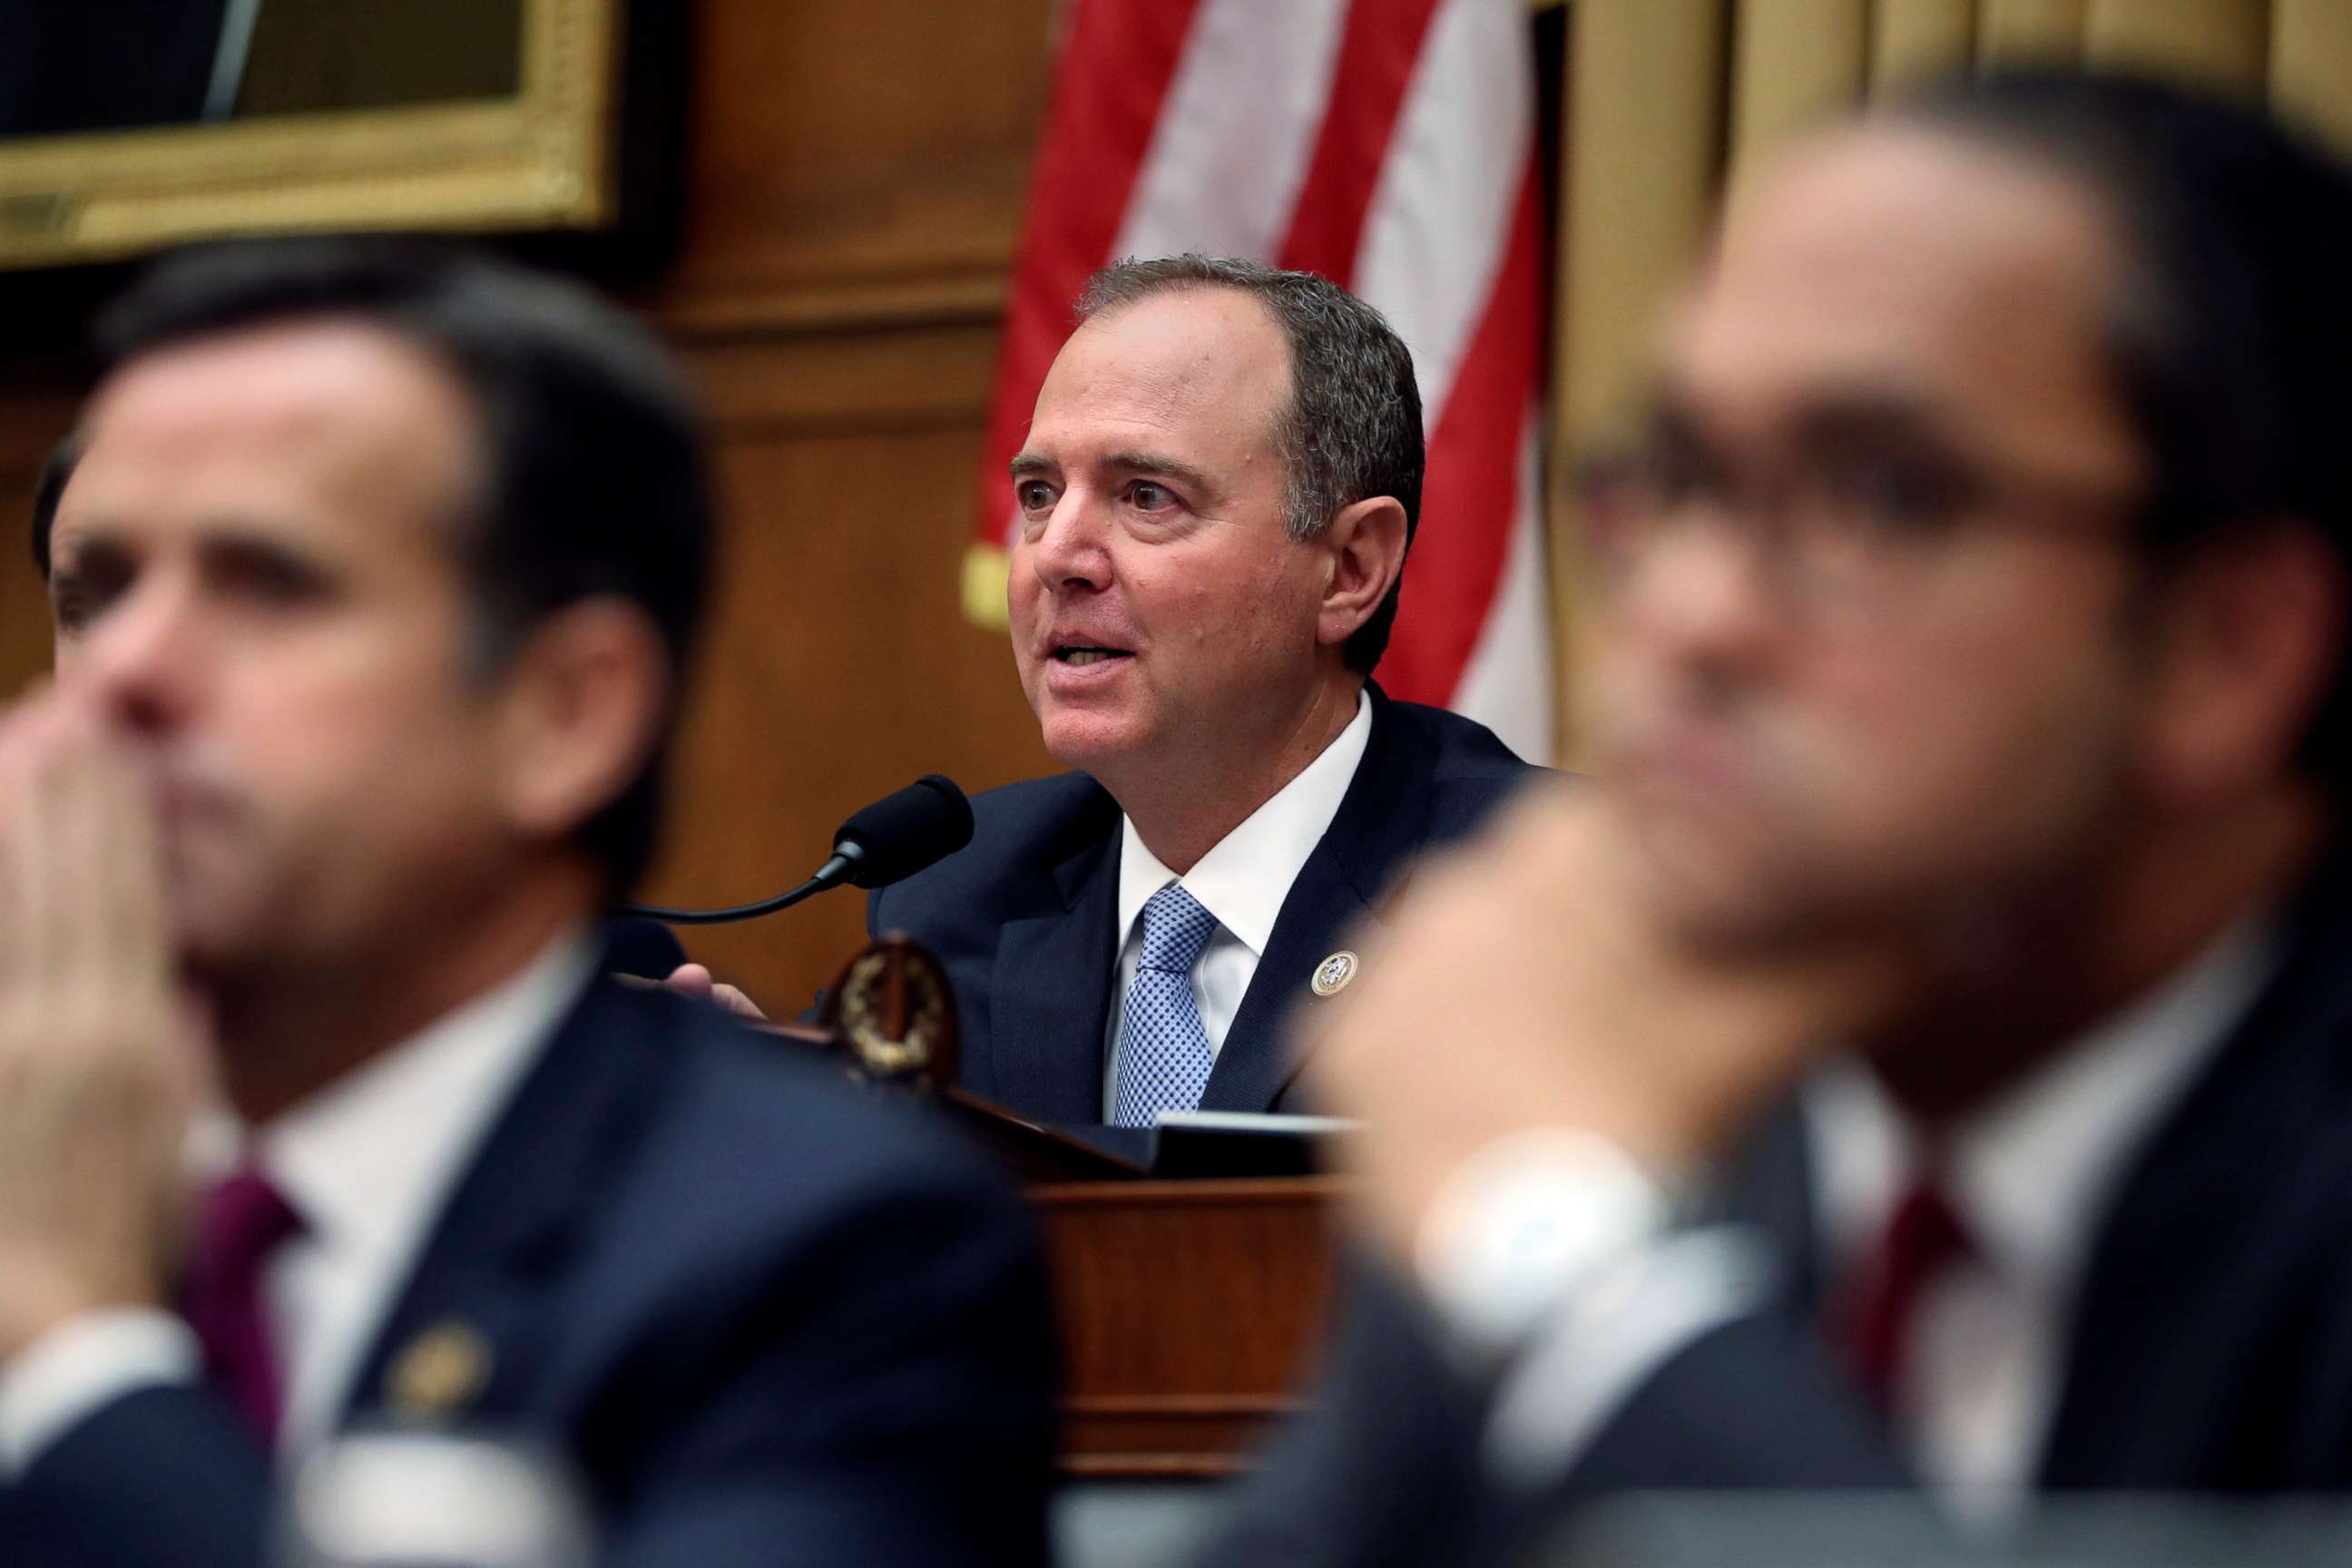 PHOTO: House Intelligence Committee Chairman Adam Schiff questions former special counsel Robert Mueller during his testimony before the House Intelligence Committee on his report on Russian election interference, July 24, 2019, in Washington, D.C.